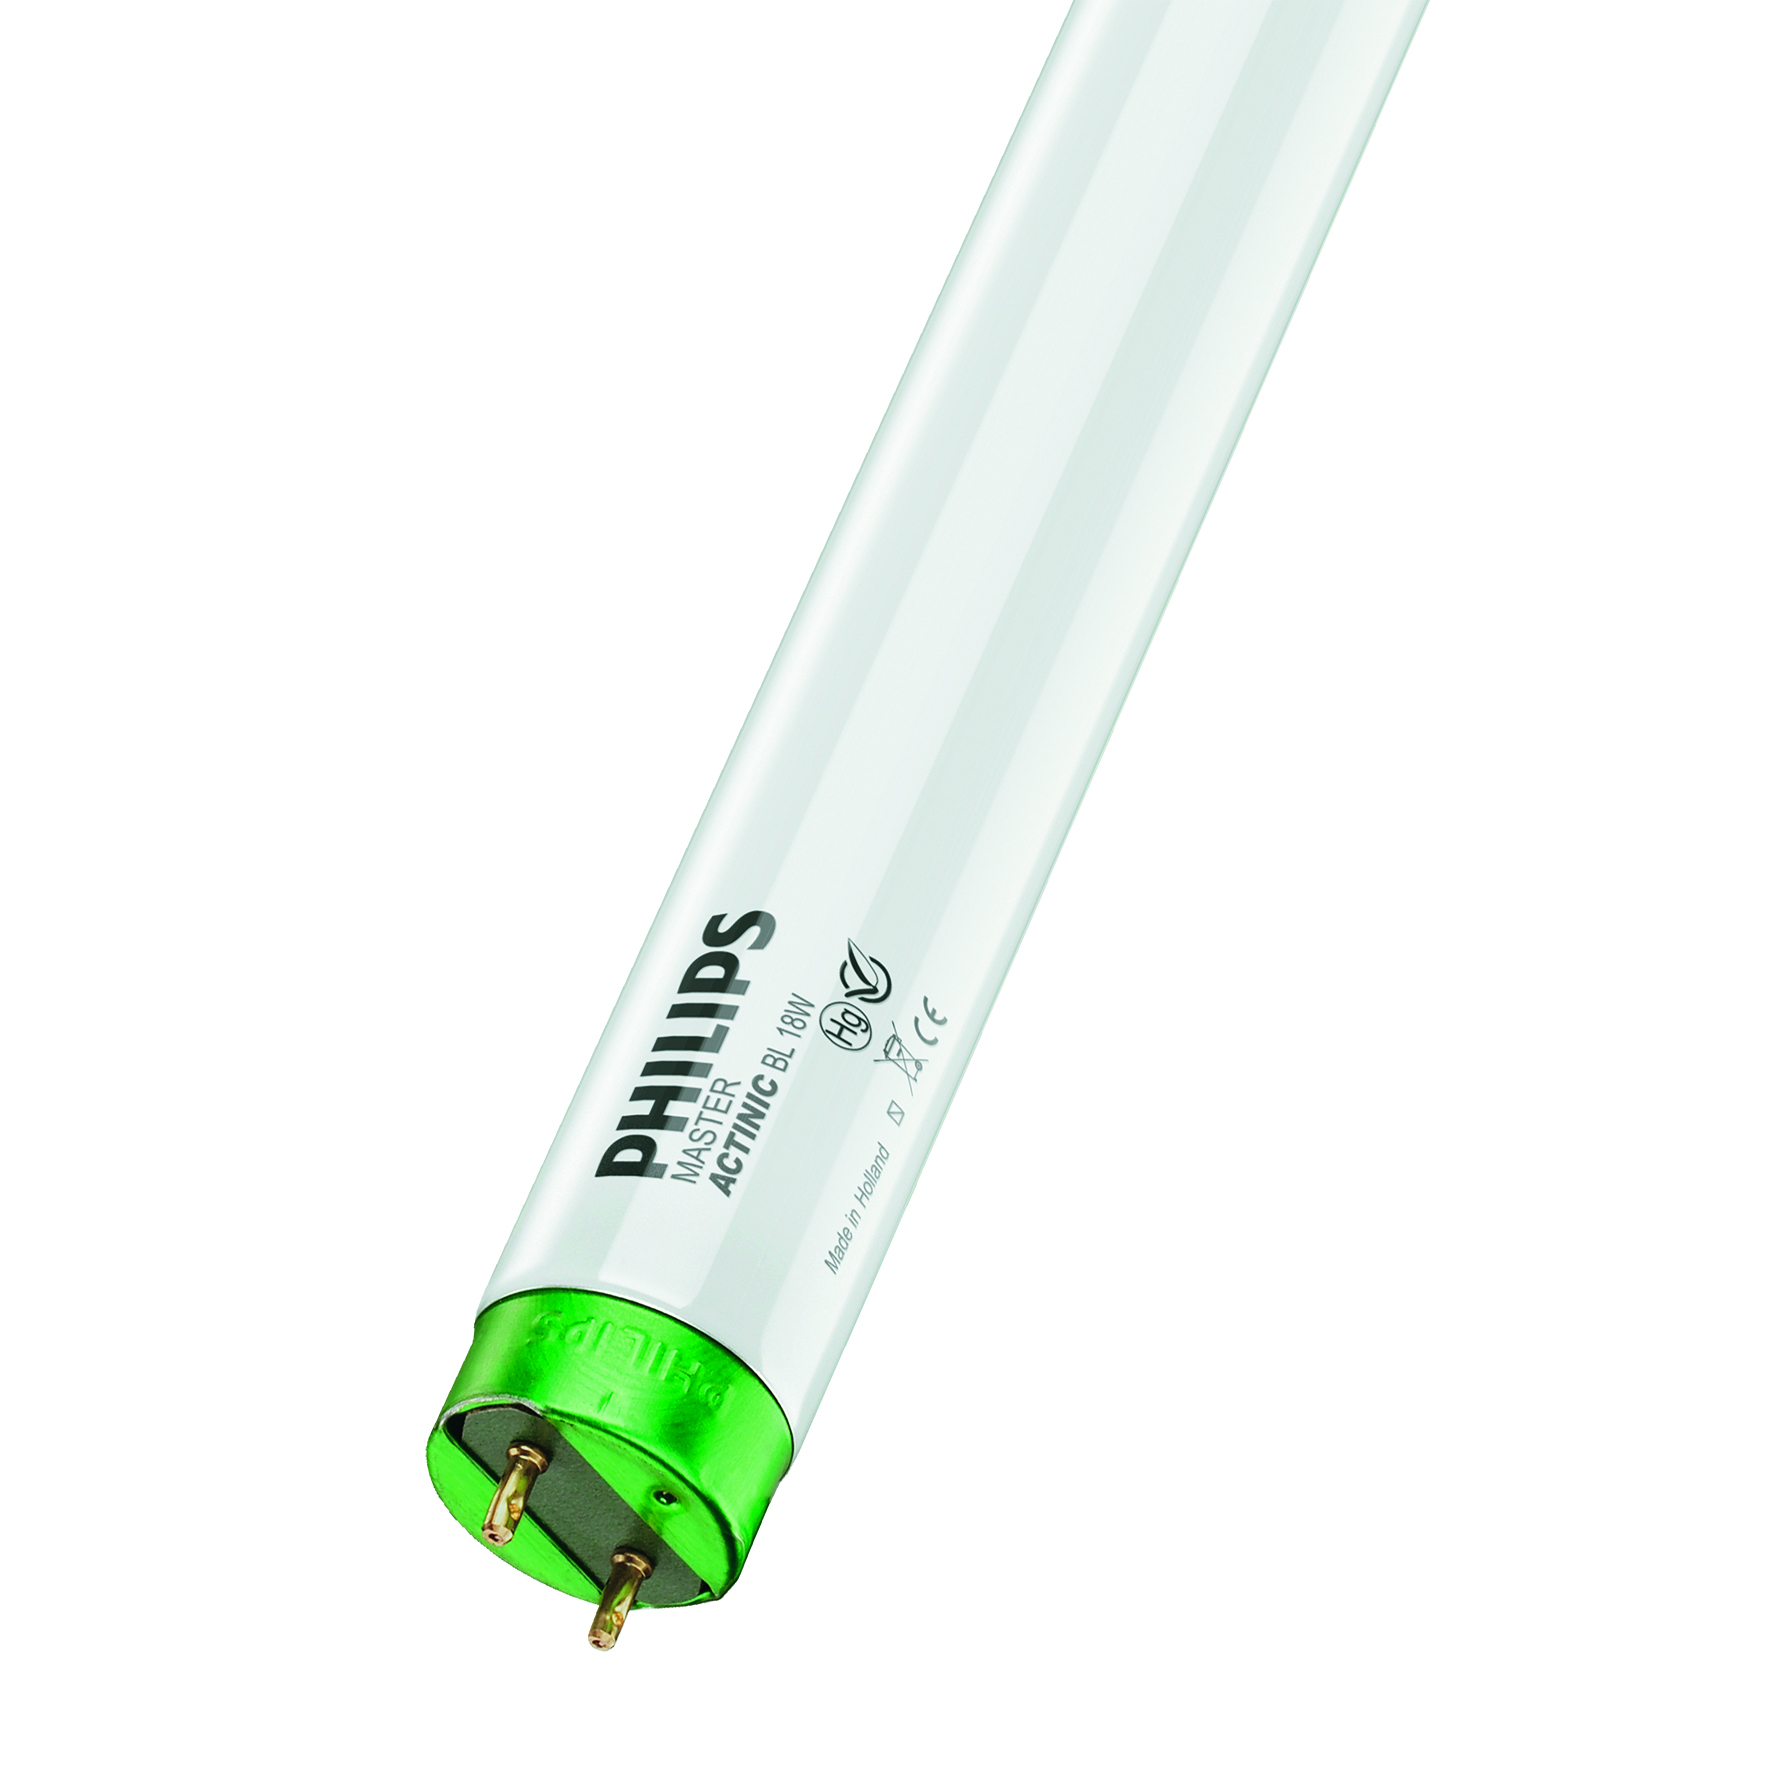 Actinic BL TL-D G13 451mm 15W/10